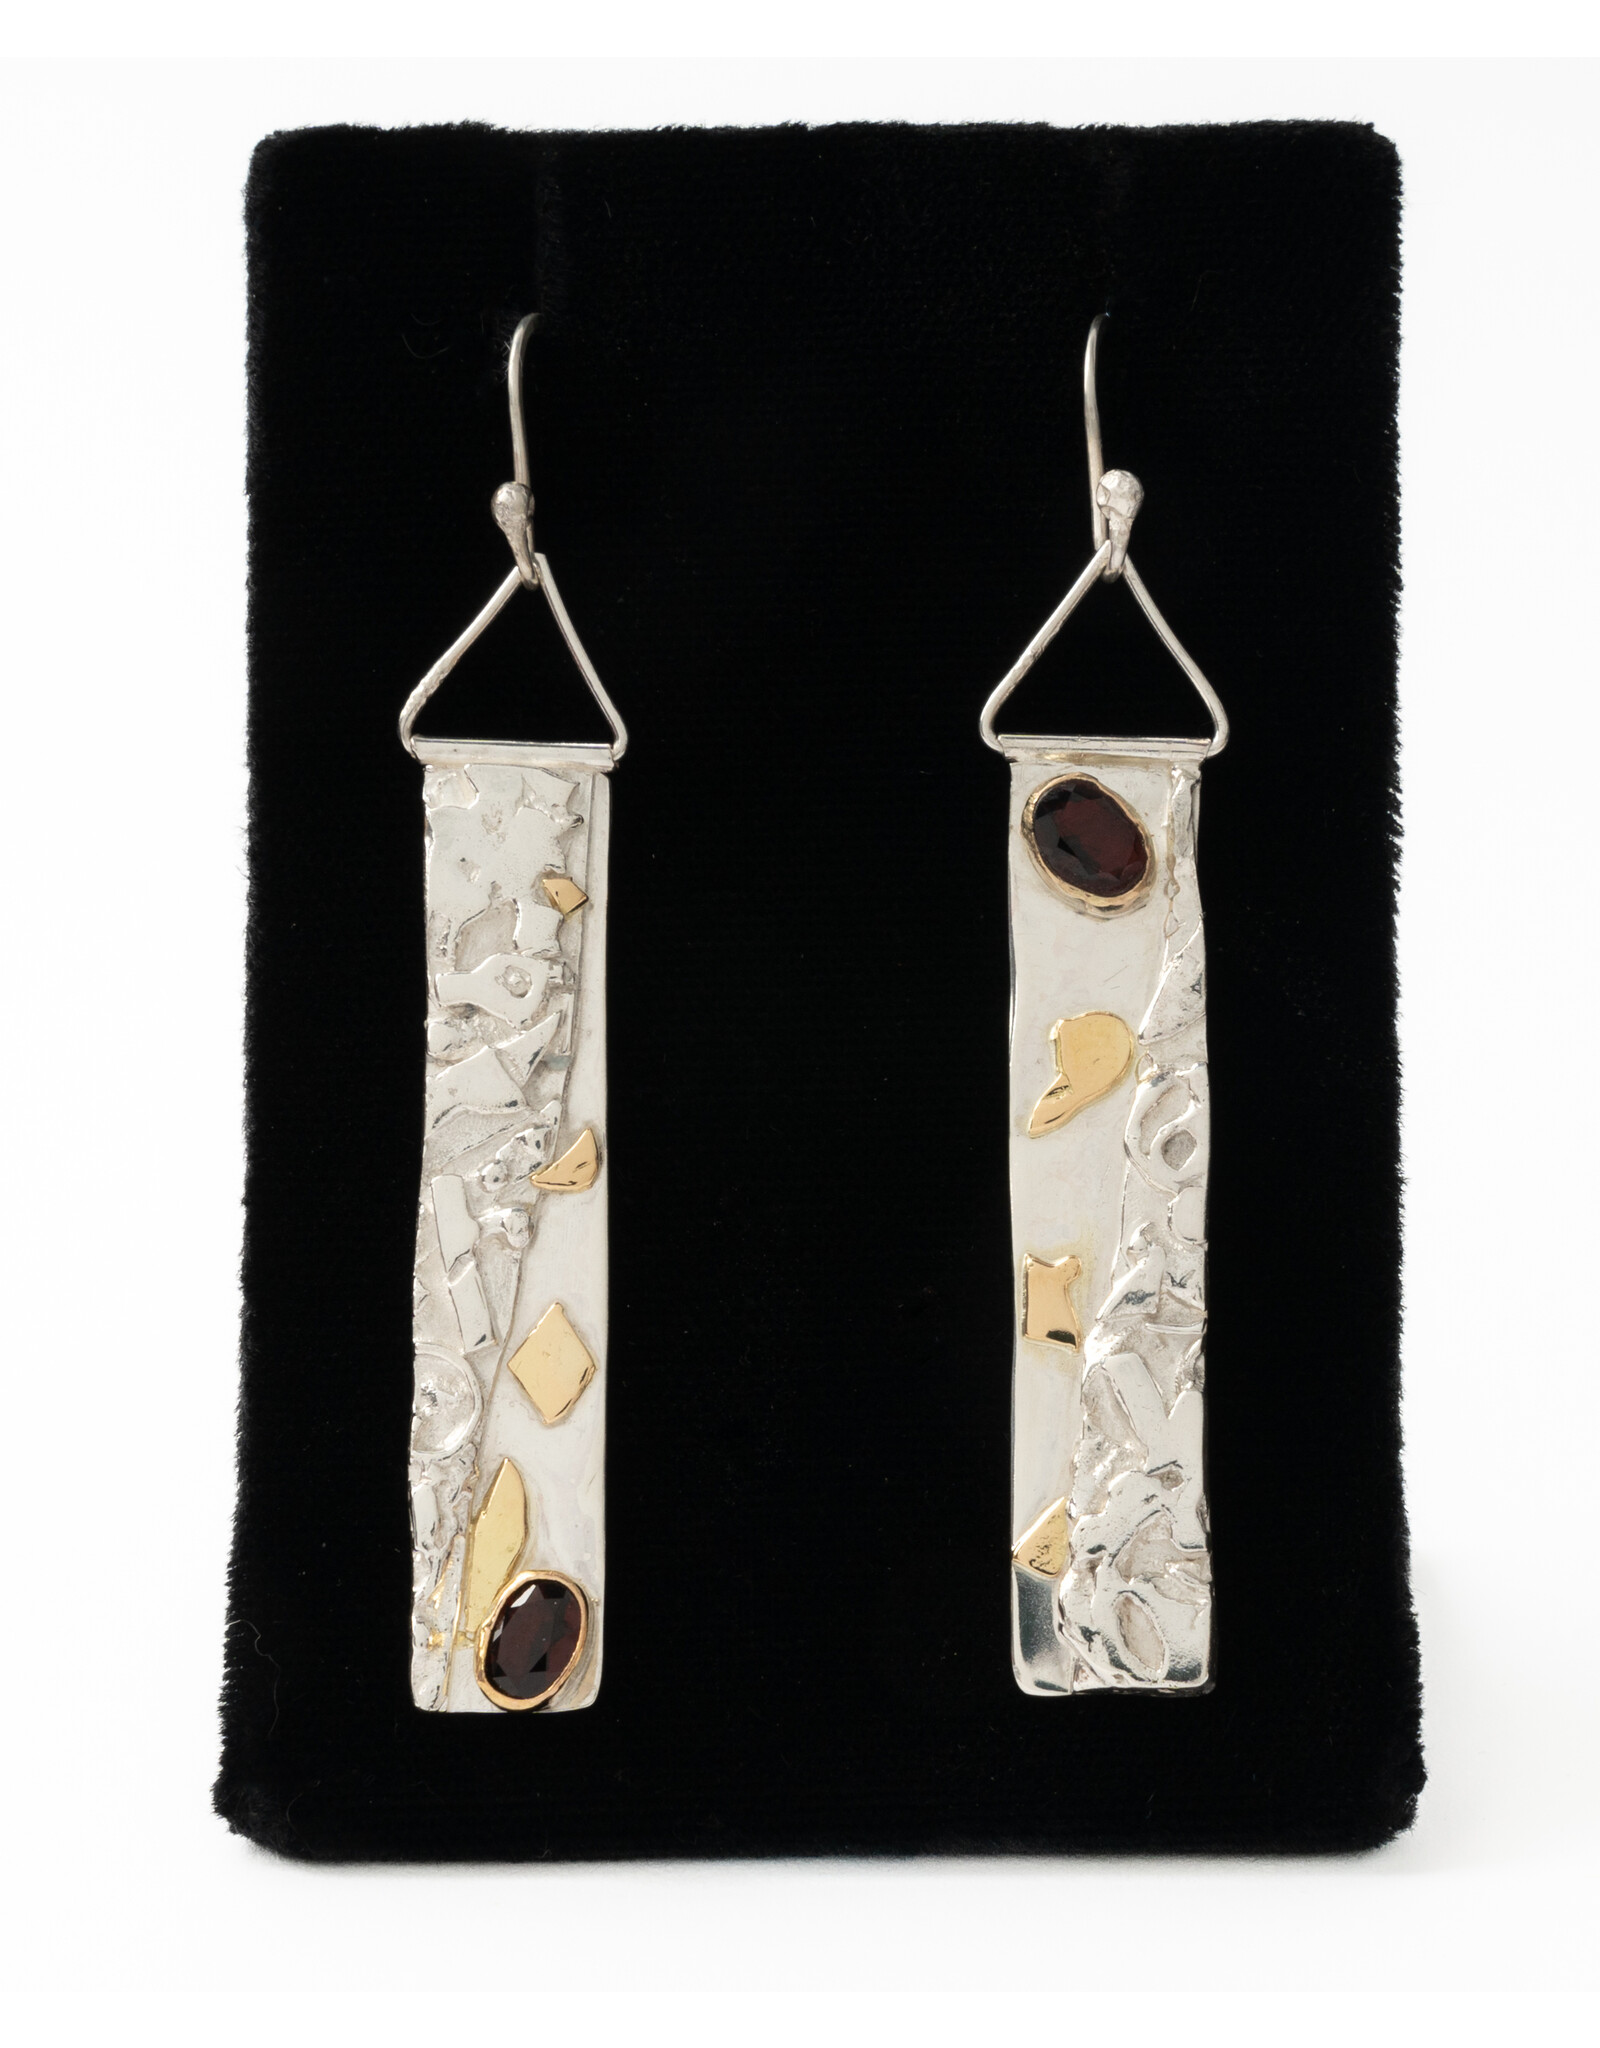 Teddy Tedford Silver Earrings with Gold and Garnet by Teddy Tedford